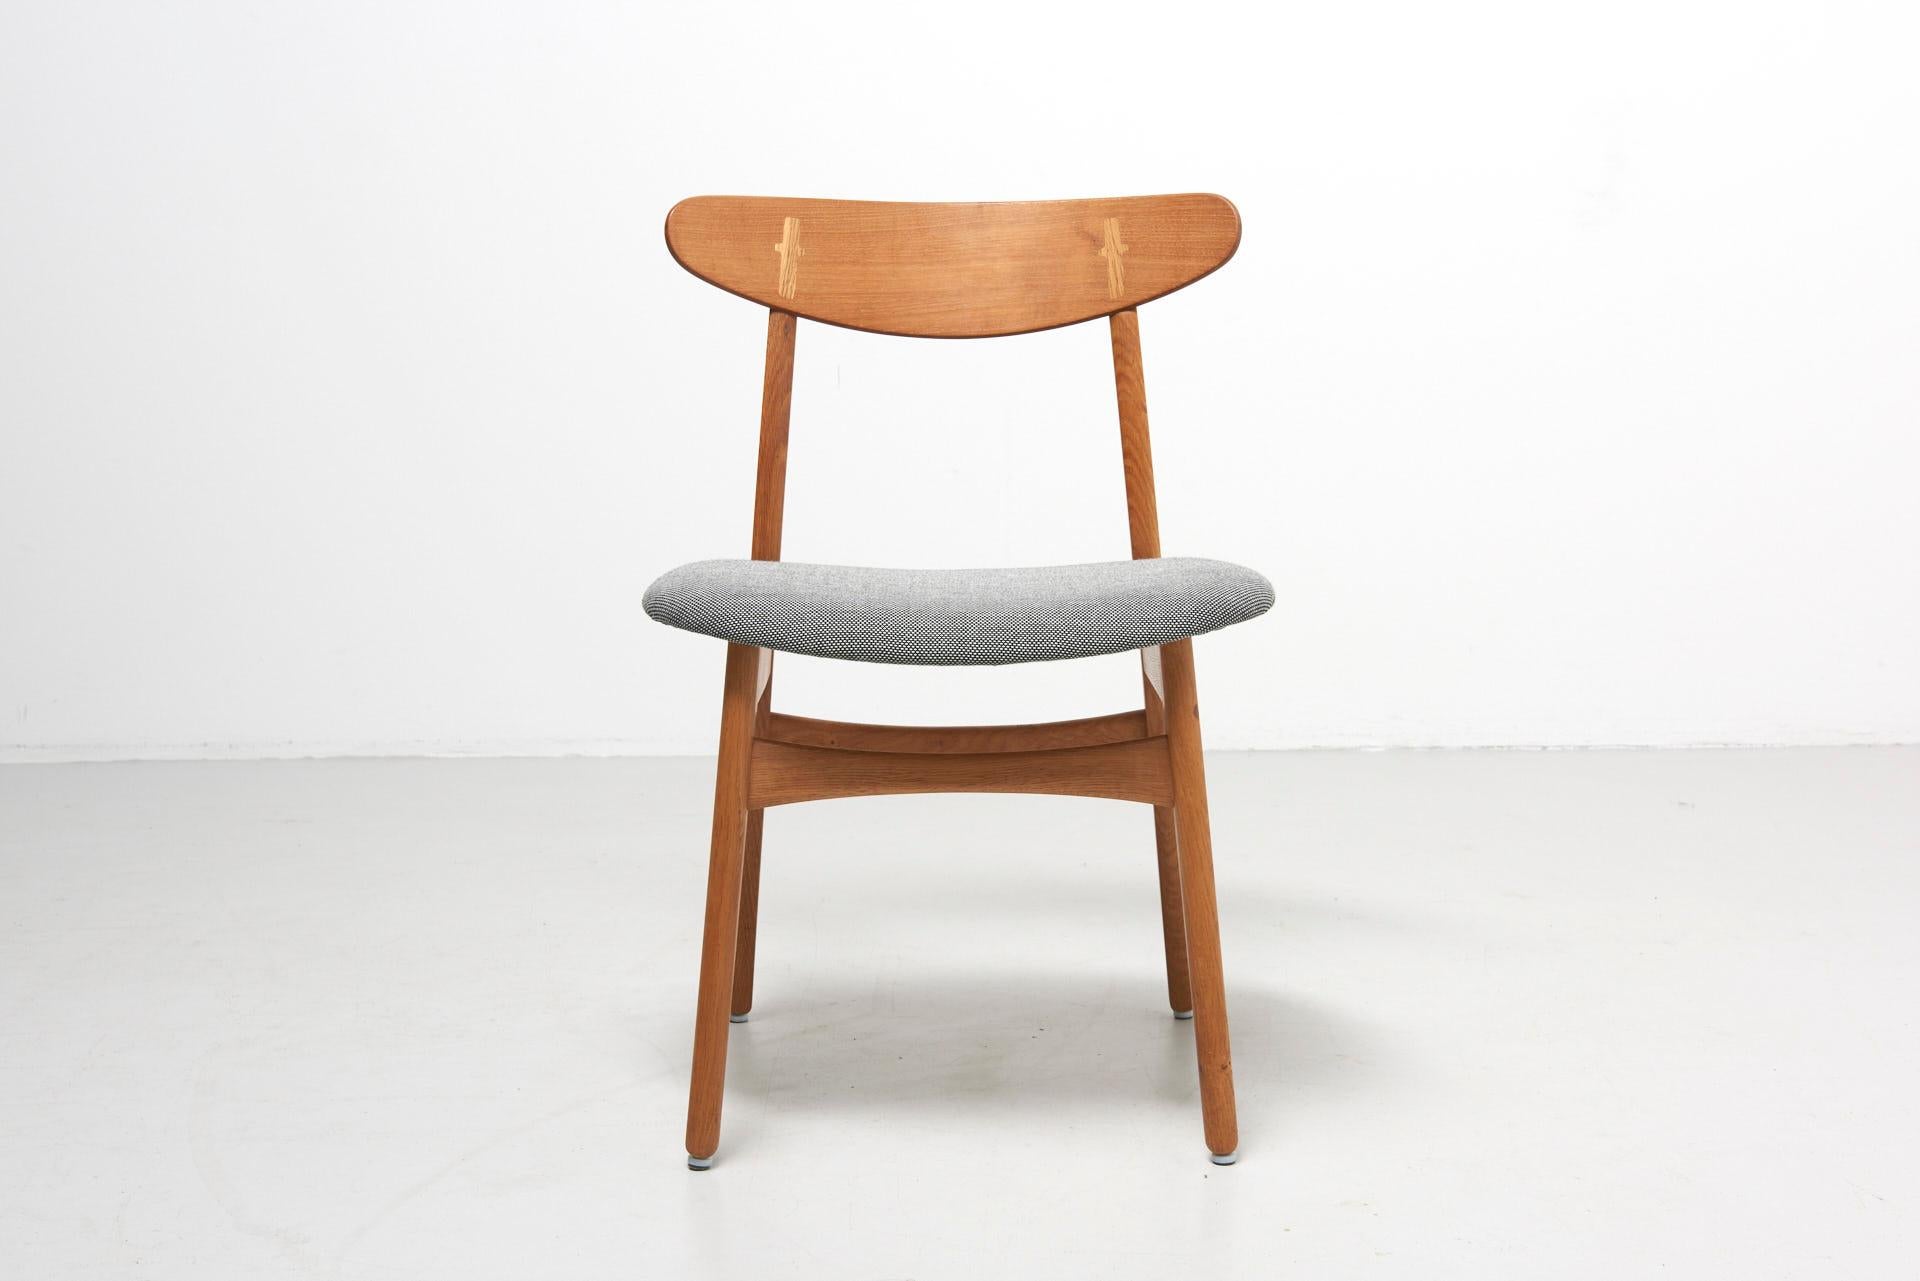 An oak chair with a teak backrest. Design by Hans J. Wegner in 1952. Model CH30, produced by Carl Hansen & Son in Denmark. Reupholstered with Kvadrat fabric.